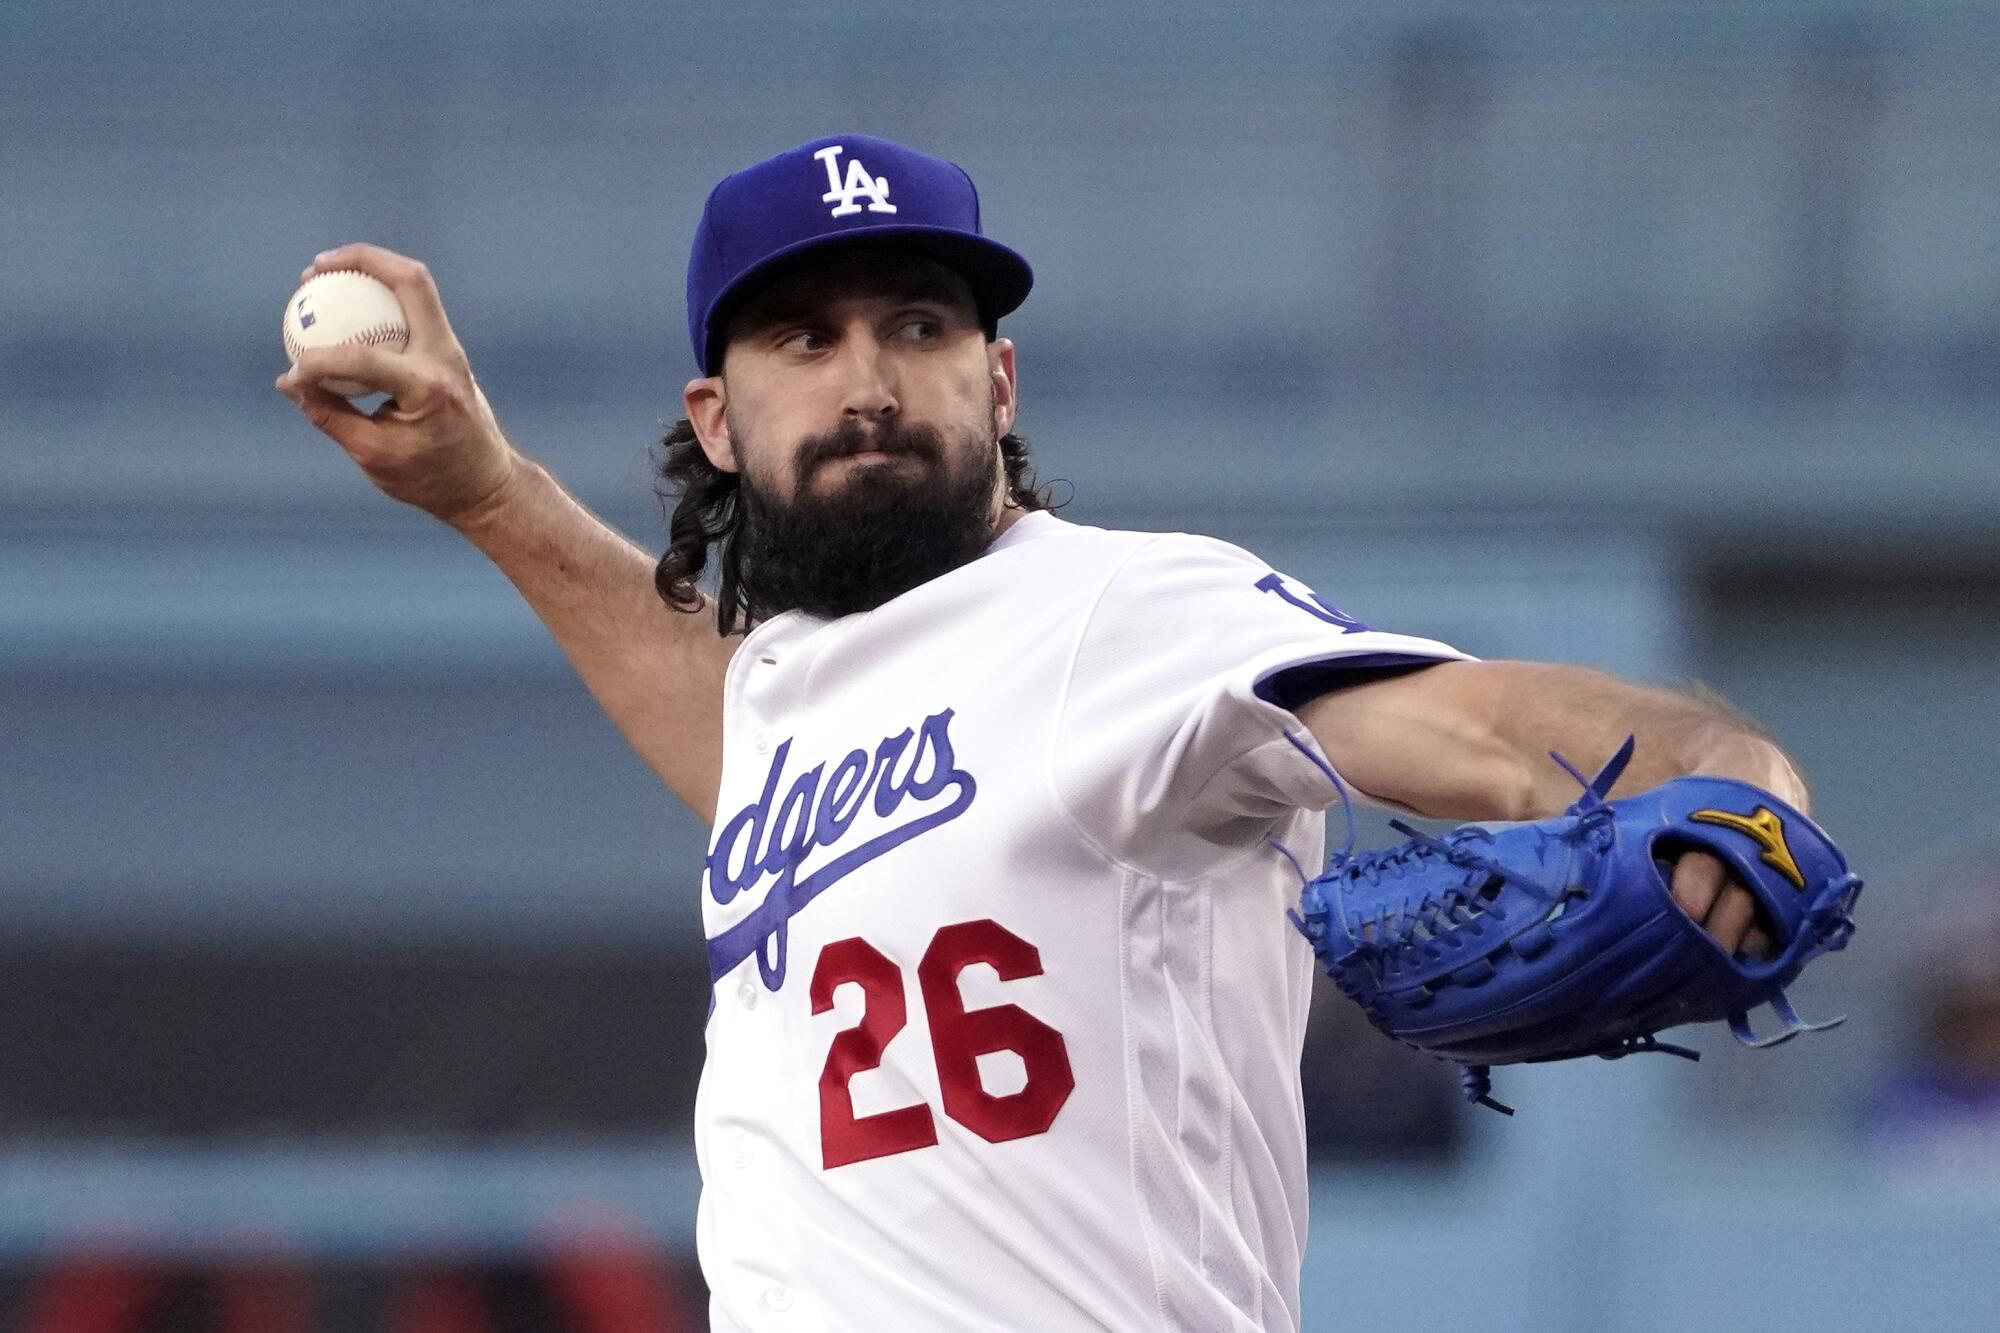 Dodgers pitcher Tony Gonsolin delivers during a game.